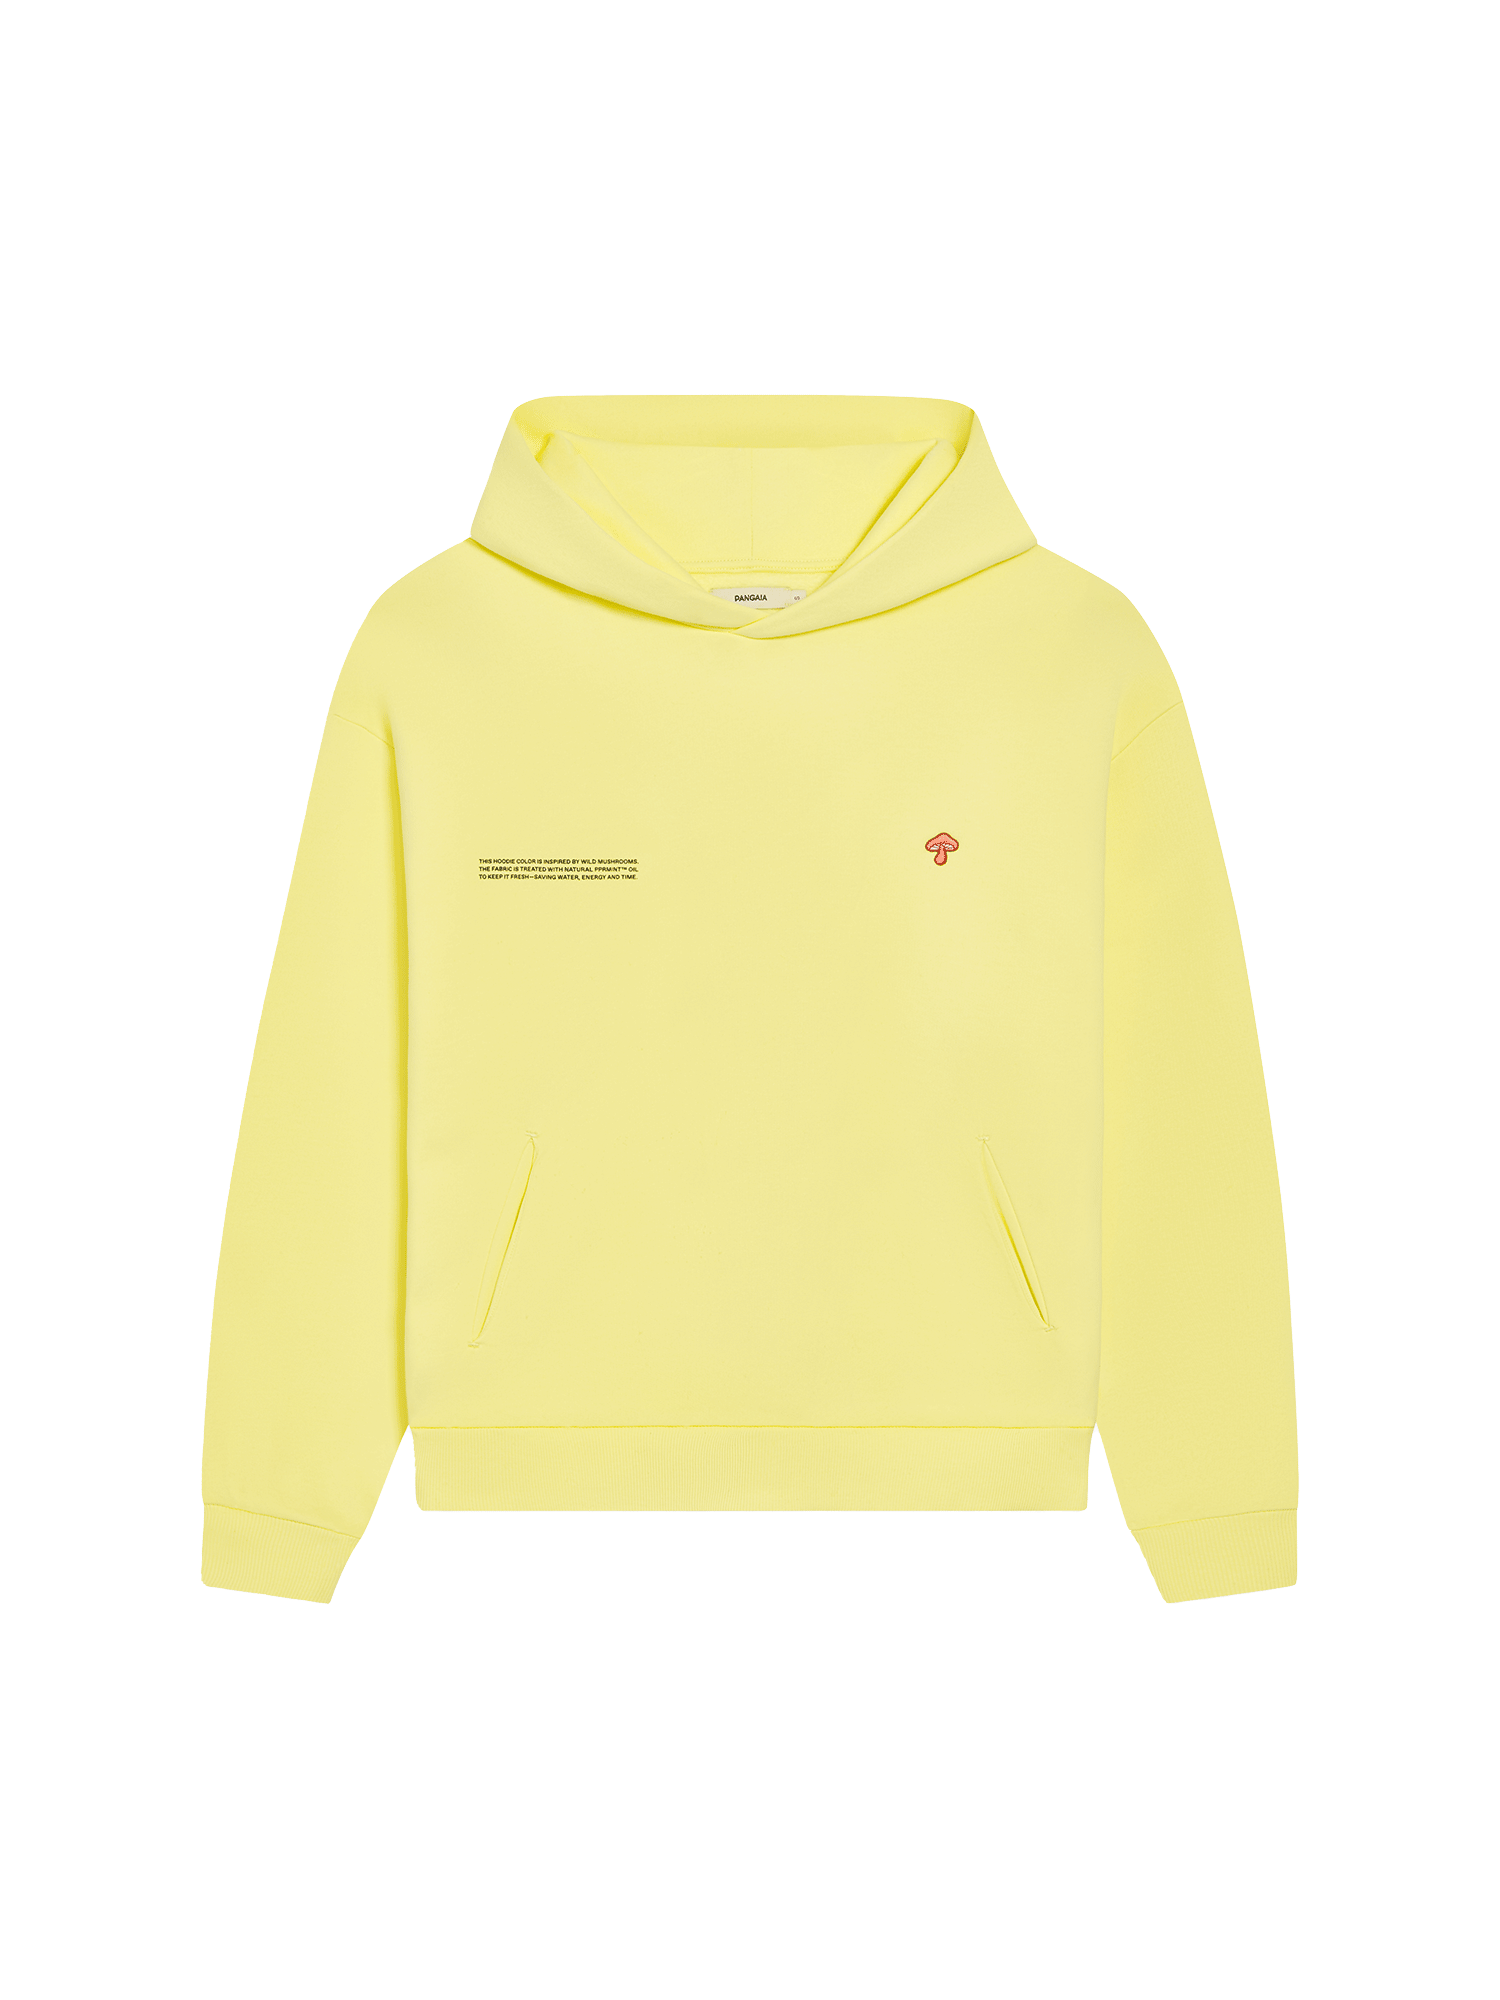 https://storage.googleapis.com/download/storage/v1/b/whering.appspot.com/o/marketplace_product_images%2Fpangaia-archive-fungi-capsule-signature-hoodiefungi-yellow-6b4gaBFP9yCdGowvdnWz4D.png?generation=1692162040505705&alt=media